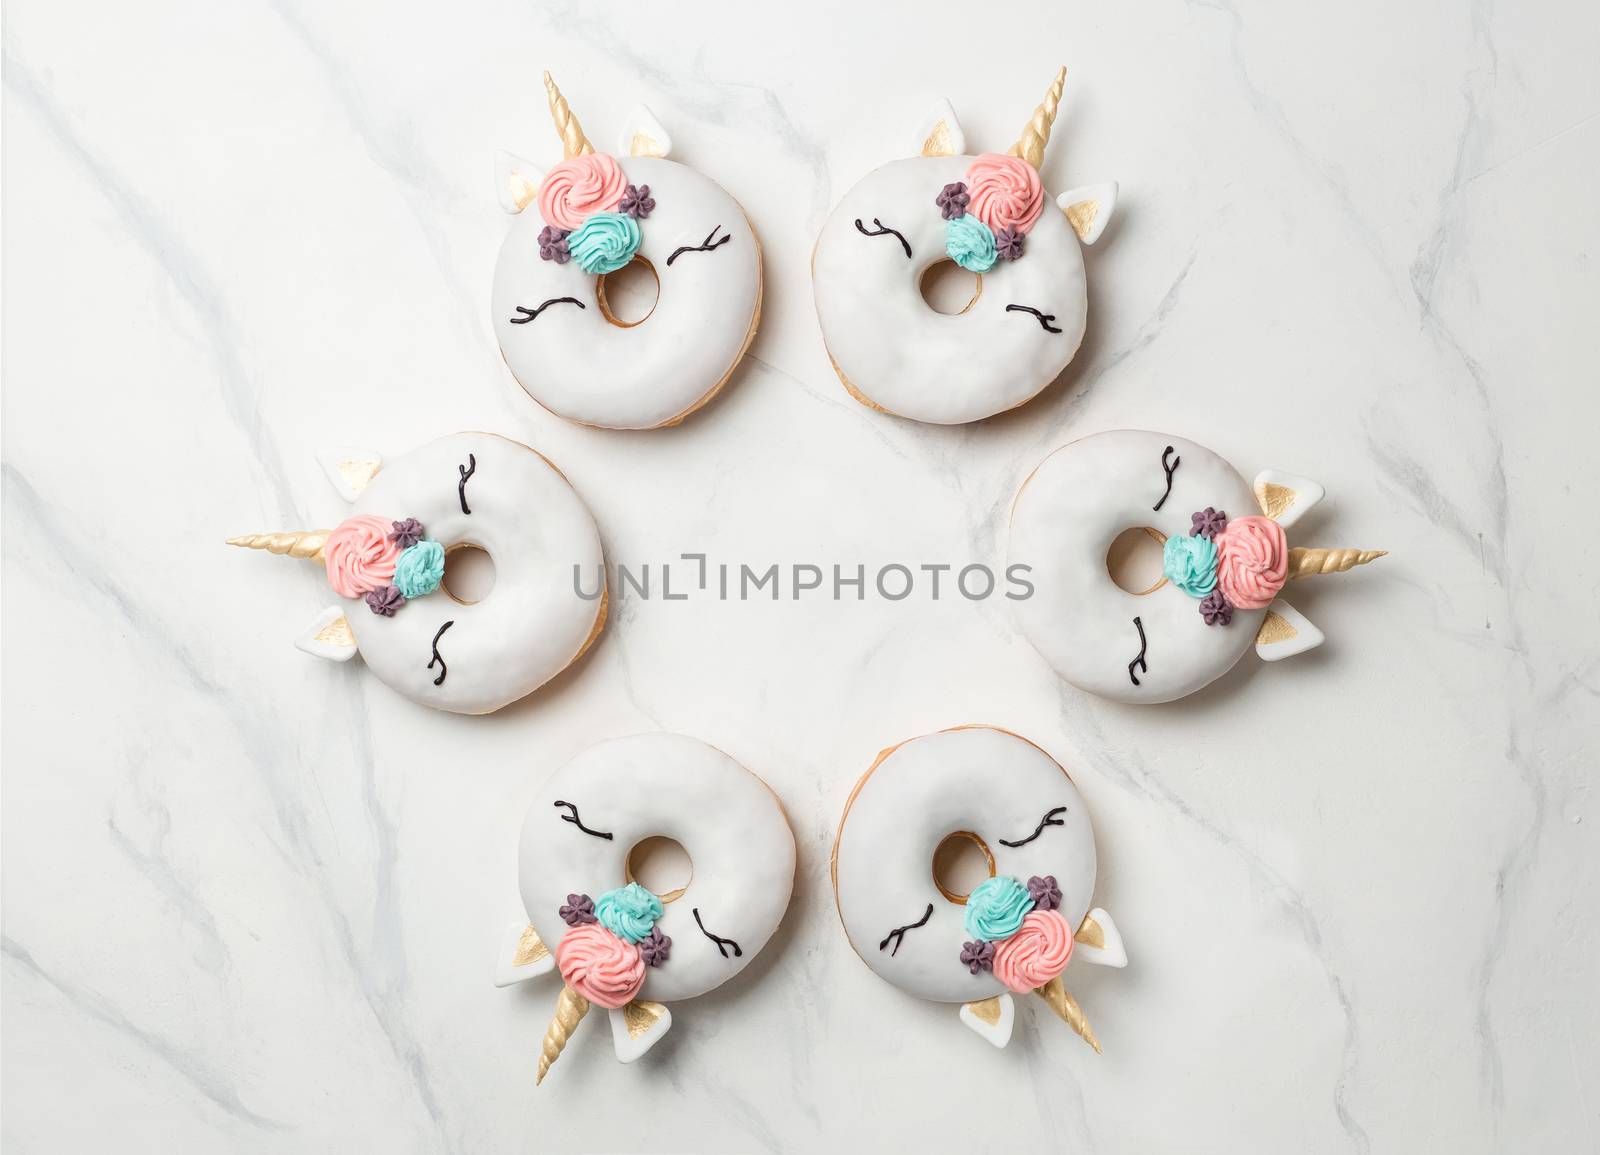 Unicorn donuts over white marble background. Trendy donut unicorn with white glaze in circle shape. Top view or flat lay. Copy space for text.